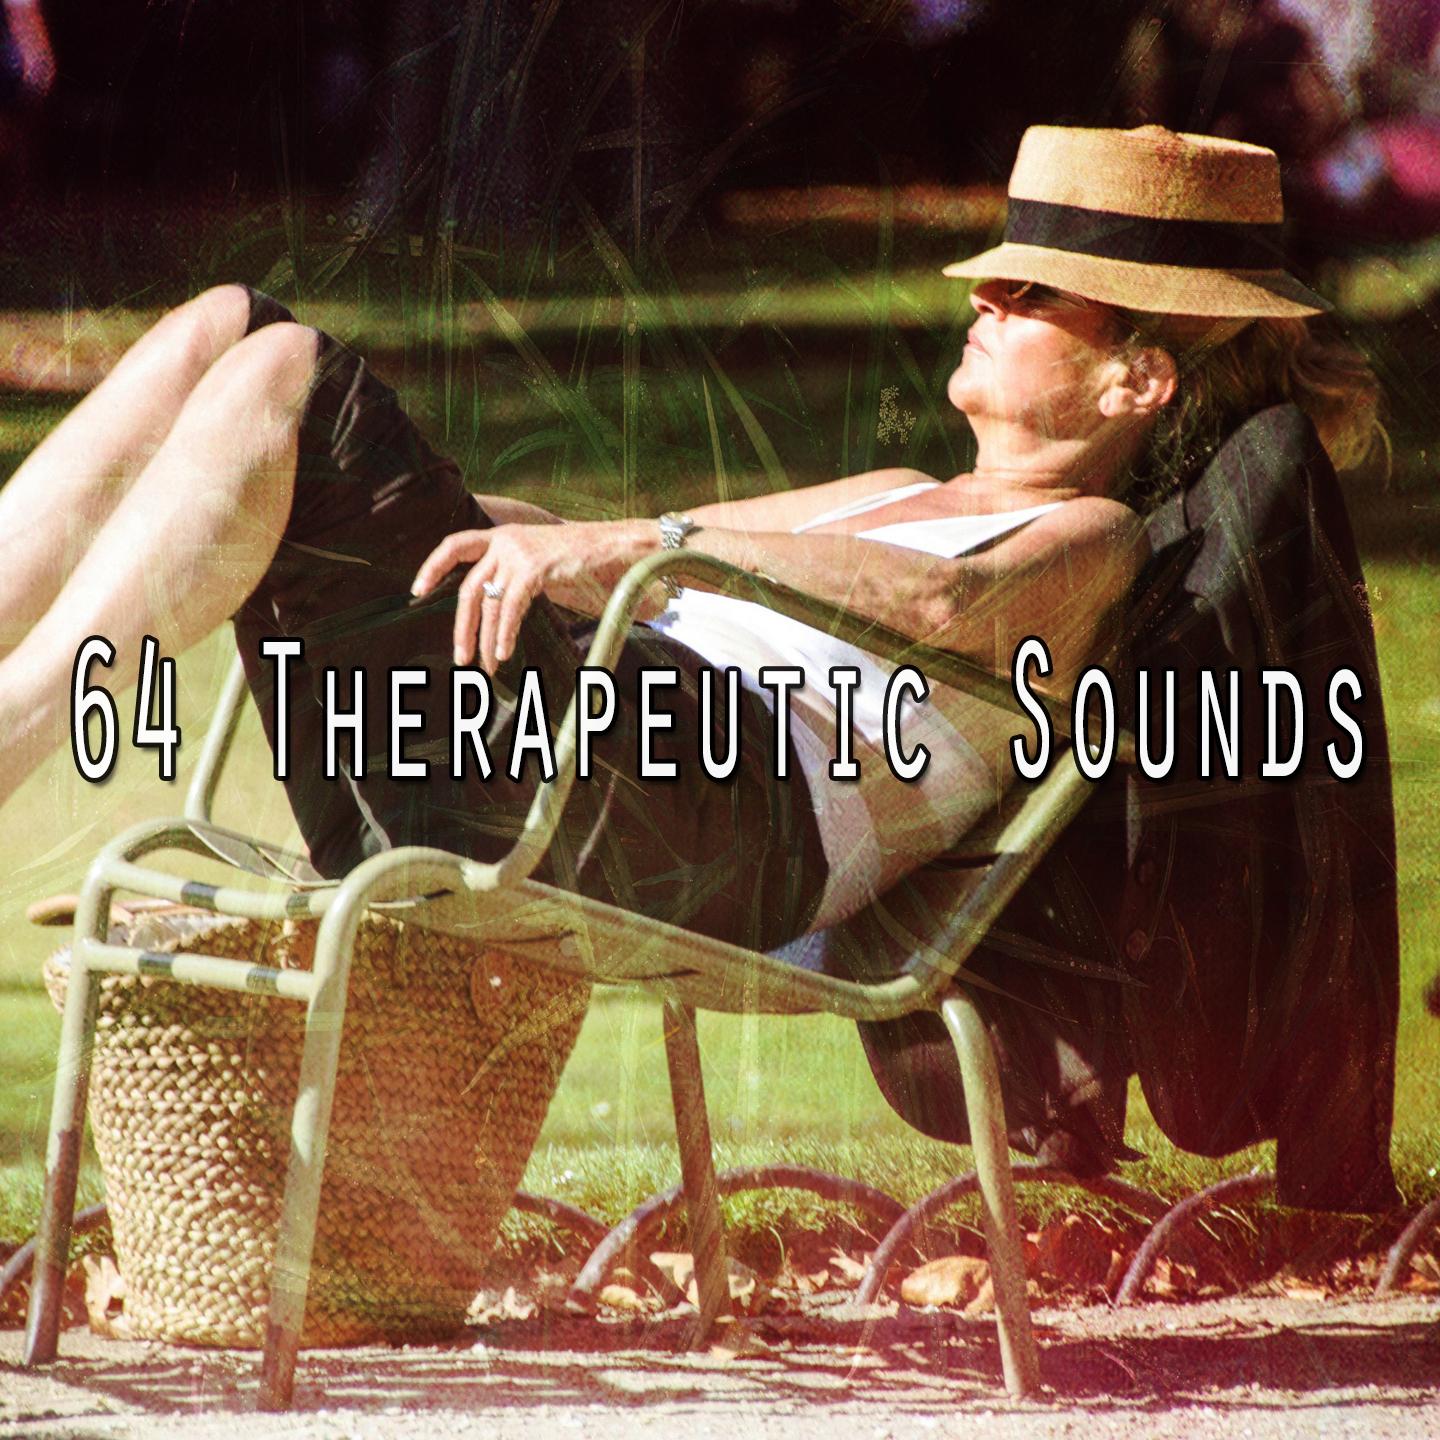 64 Therapeutic Sounds